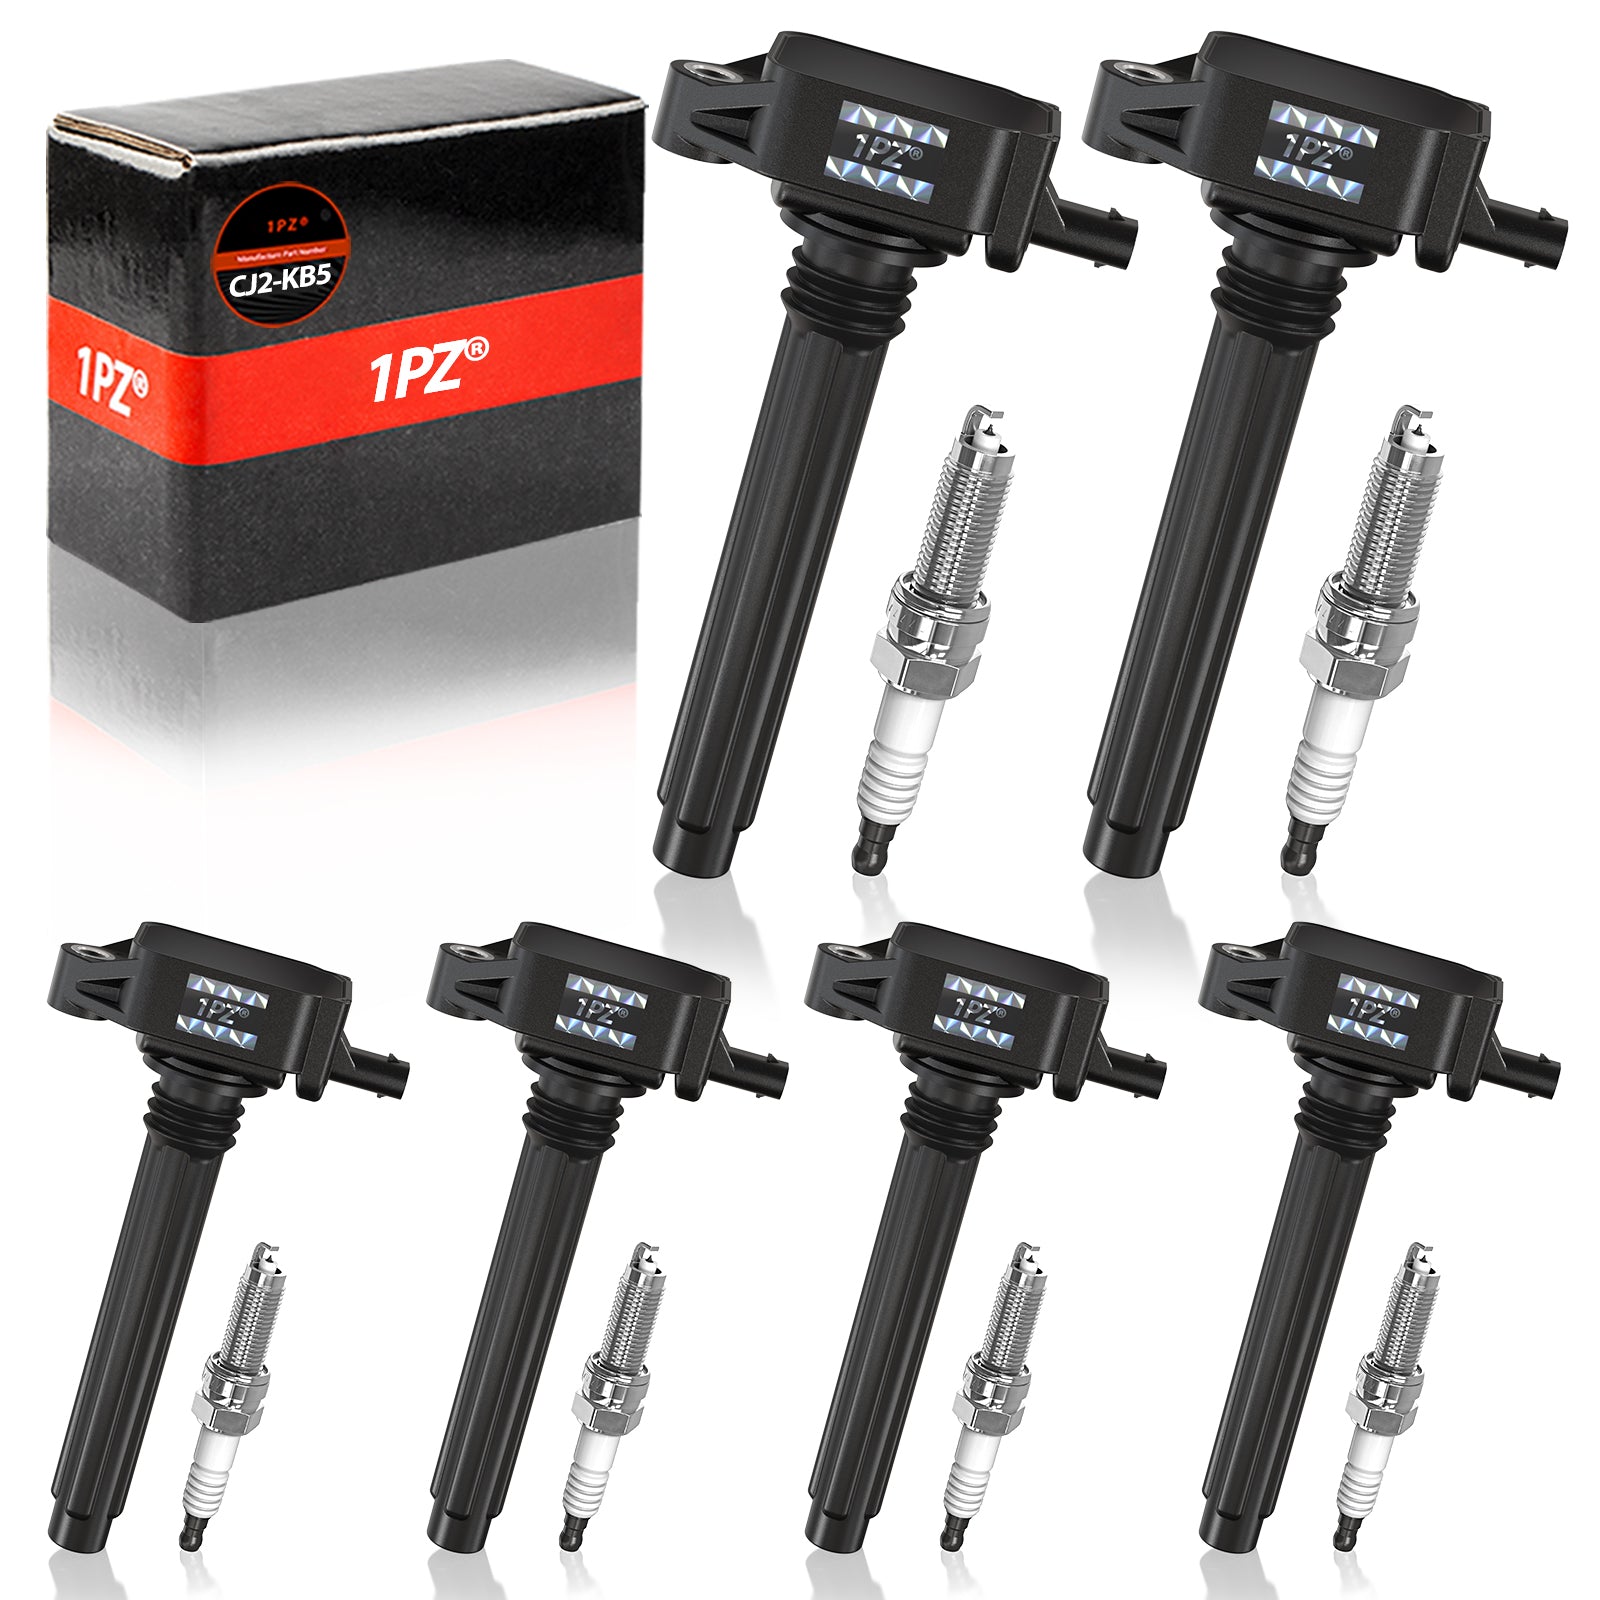 1PZ Ignition Coil Pack UF648 and Iridium Spark Plug 9407 Compatible with Avenger Grand Caravan Dodge Journey Jeep Wrangler Chrysler 200 300 Town Country RAM 1500 2500 3.6L V6 Set of 6